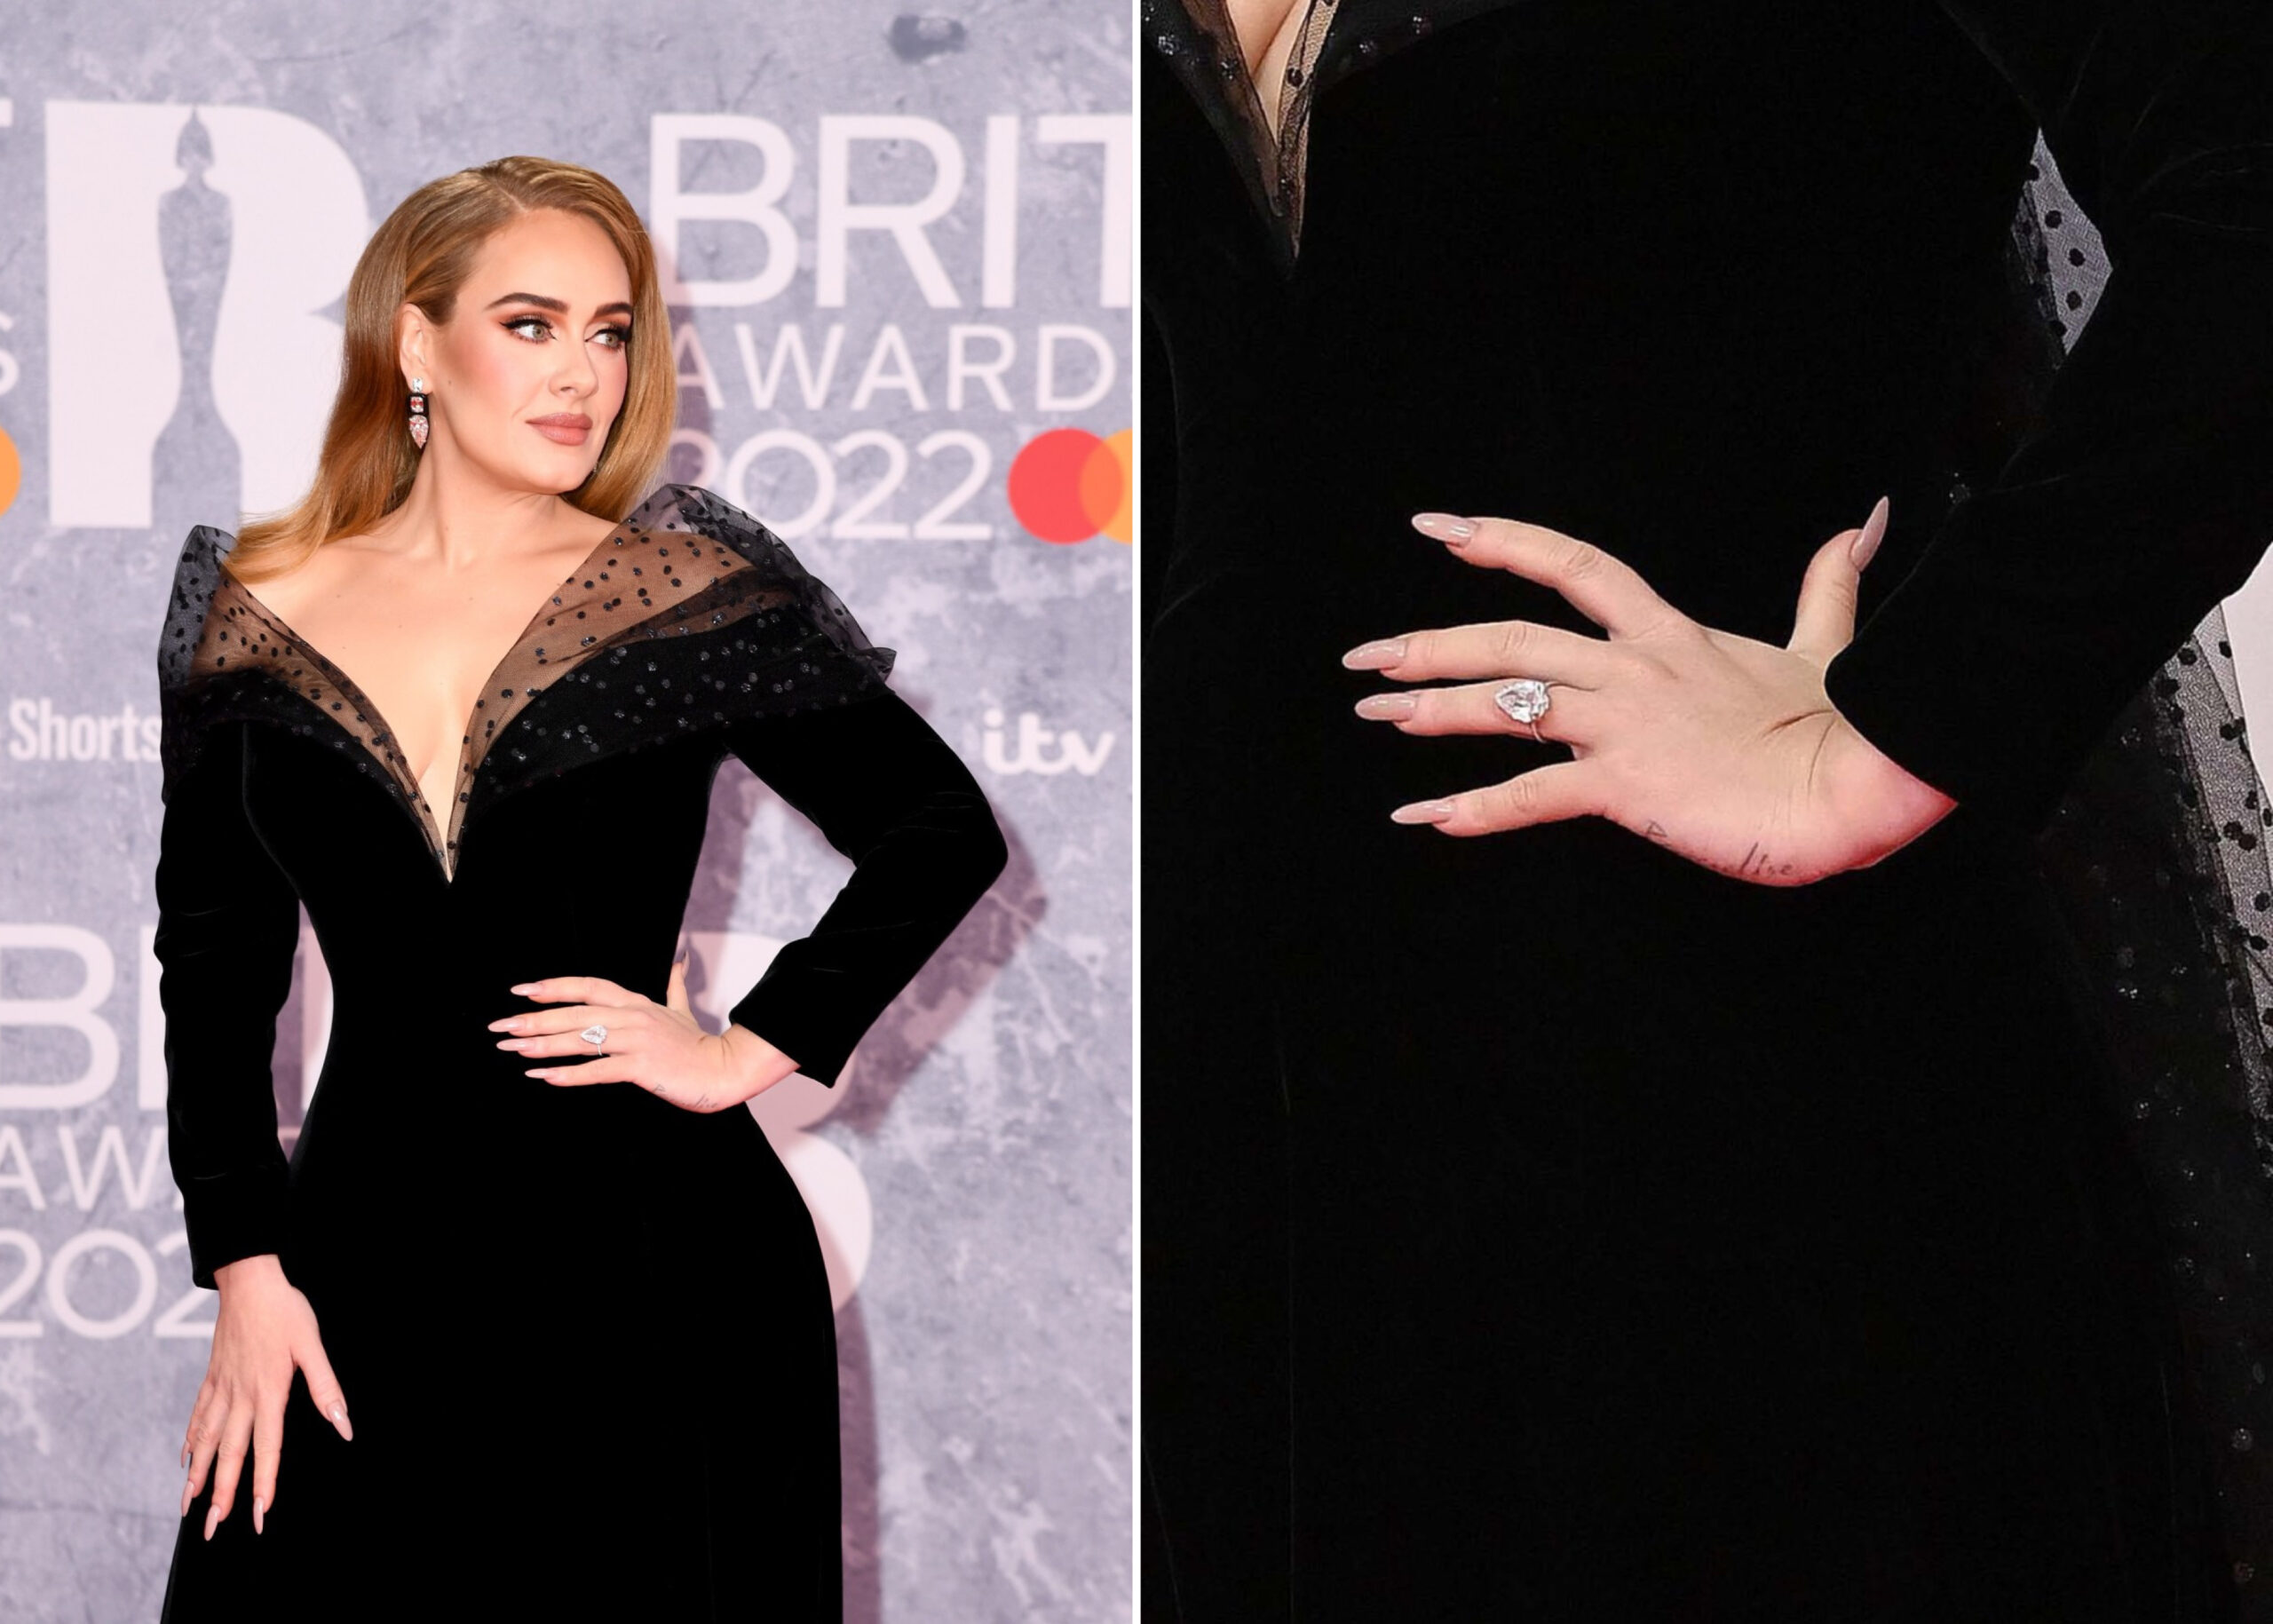 Adele Sparks Engagement Rumours After Being Spotted With Diamond Ring At 2022 Brits Award Show